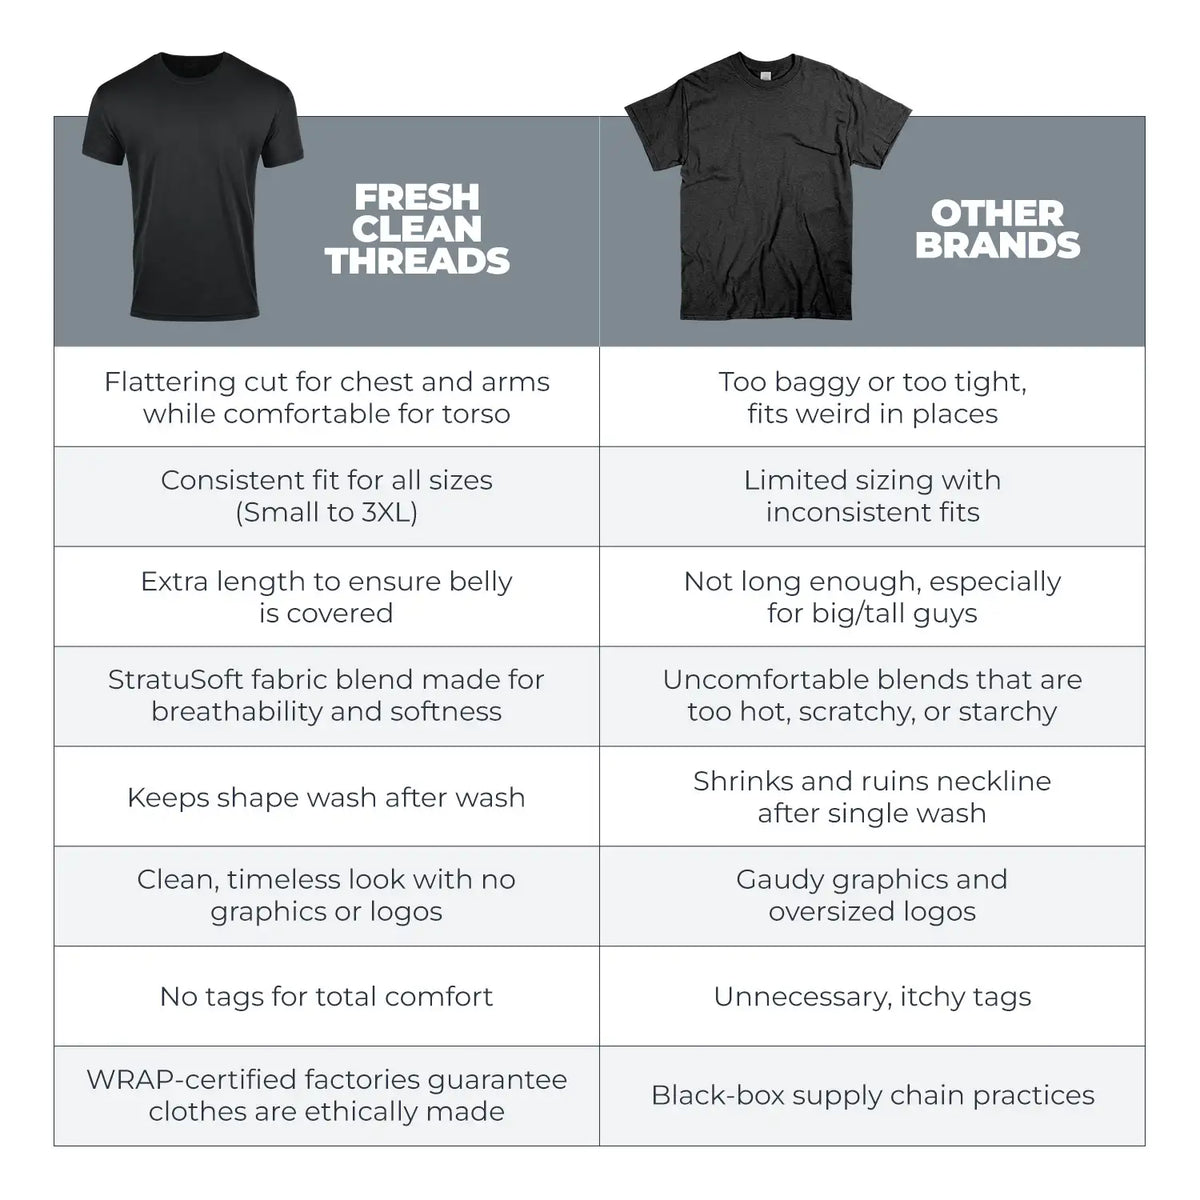 Compare Fresh Clean Threads versus Other T-shirt Brands